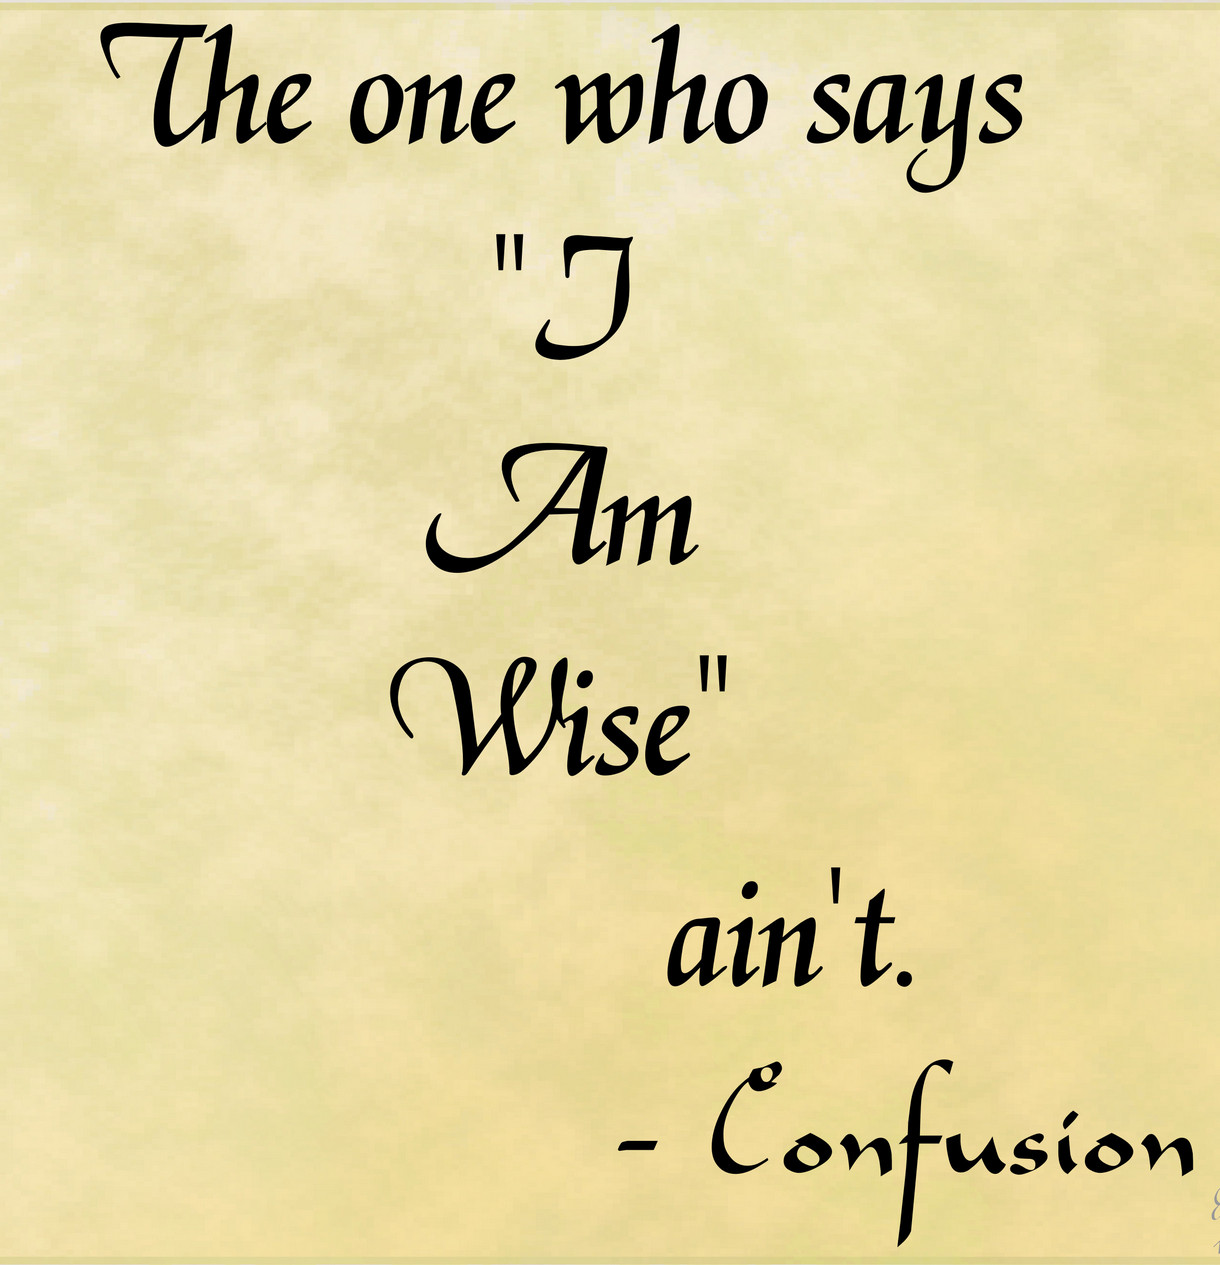 The one who says I Am Wise ain't.